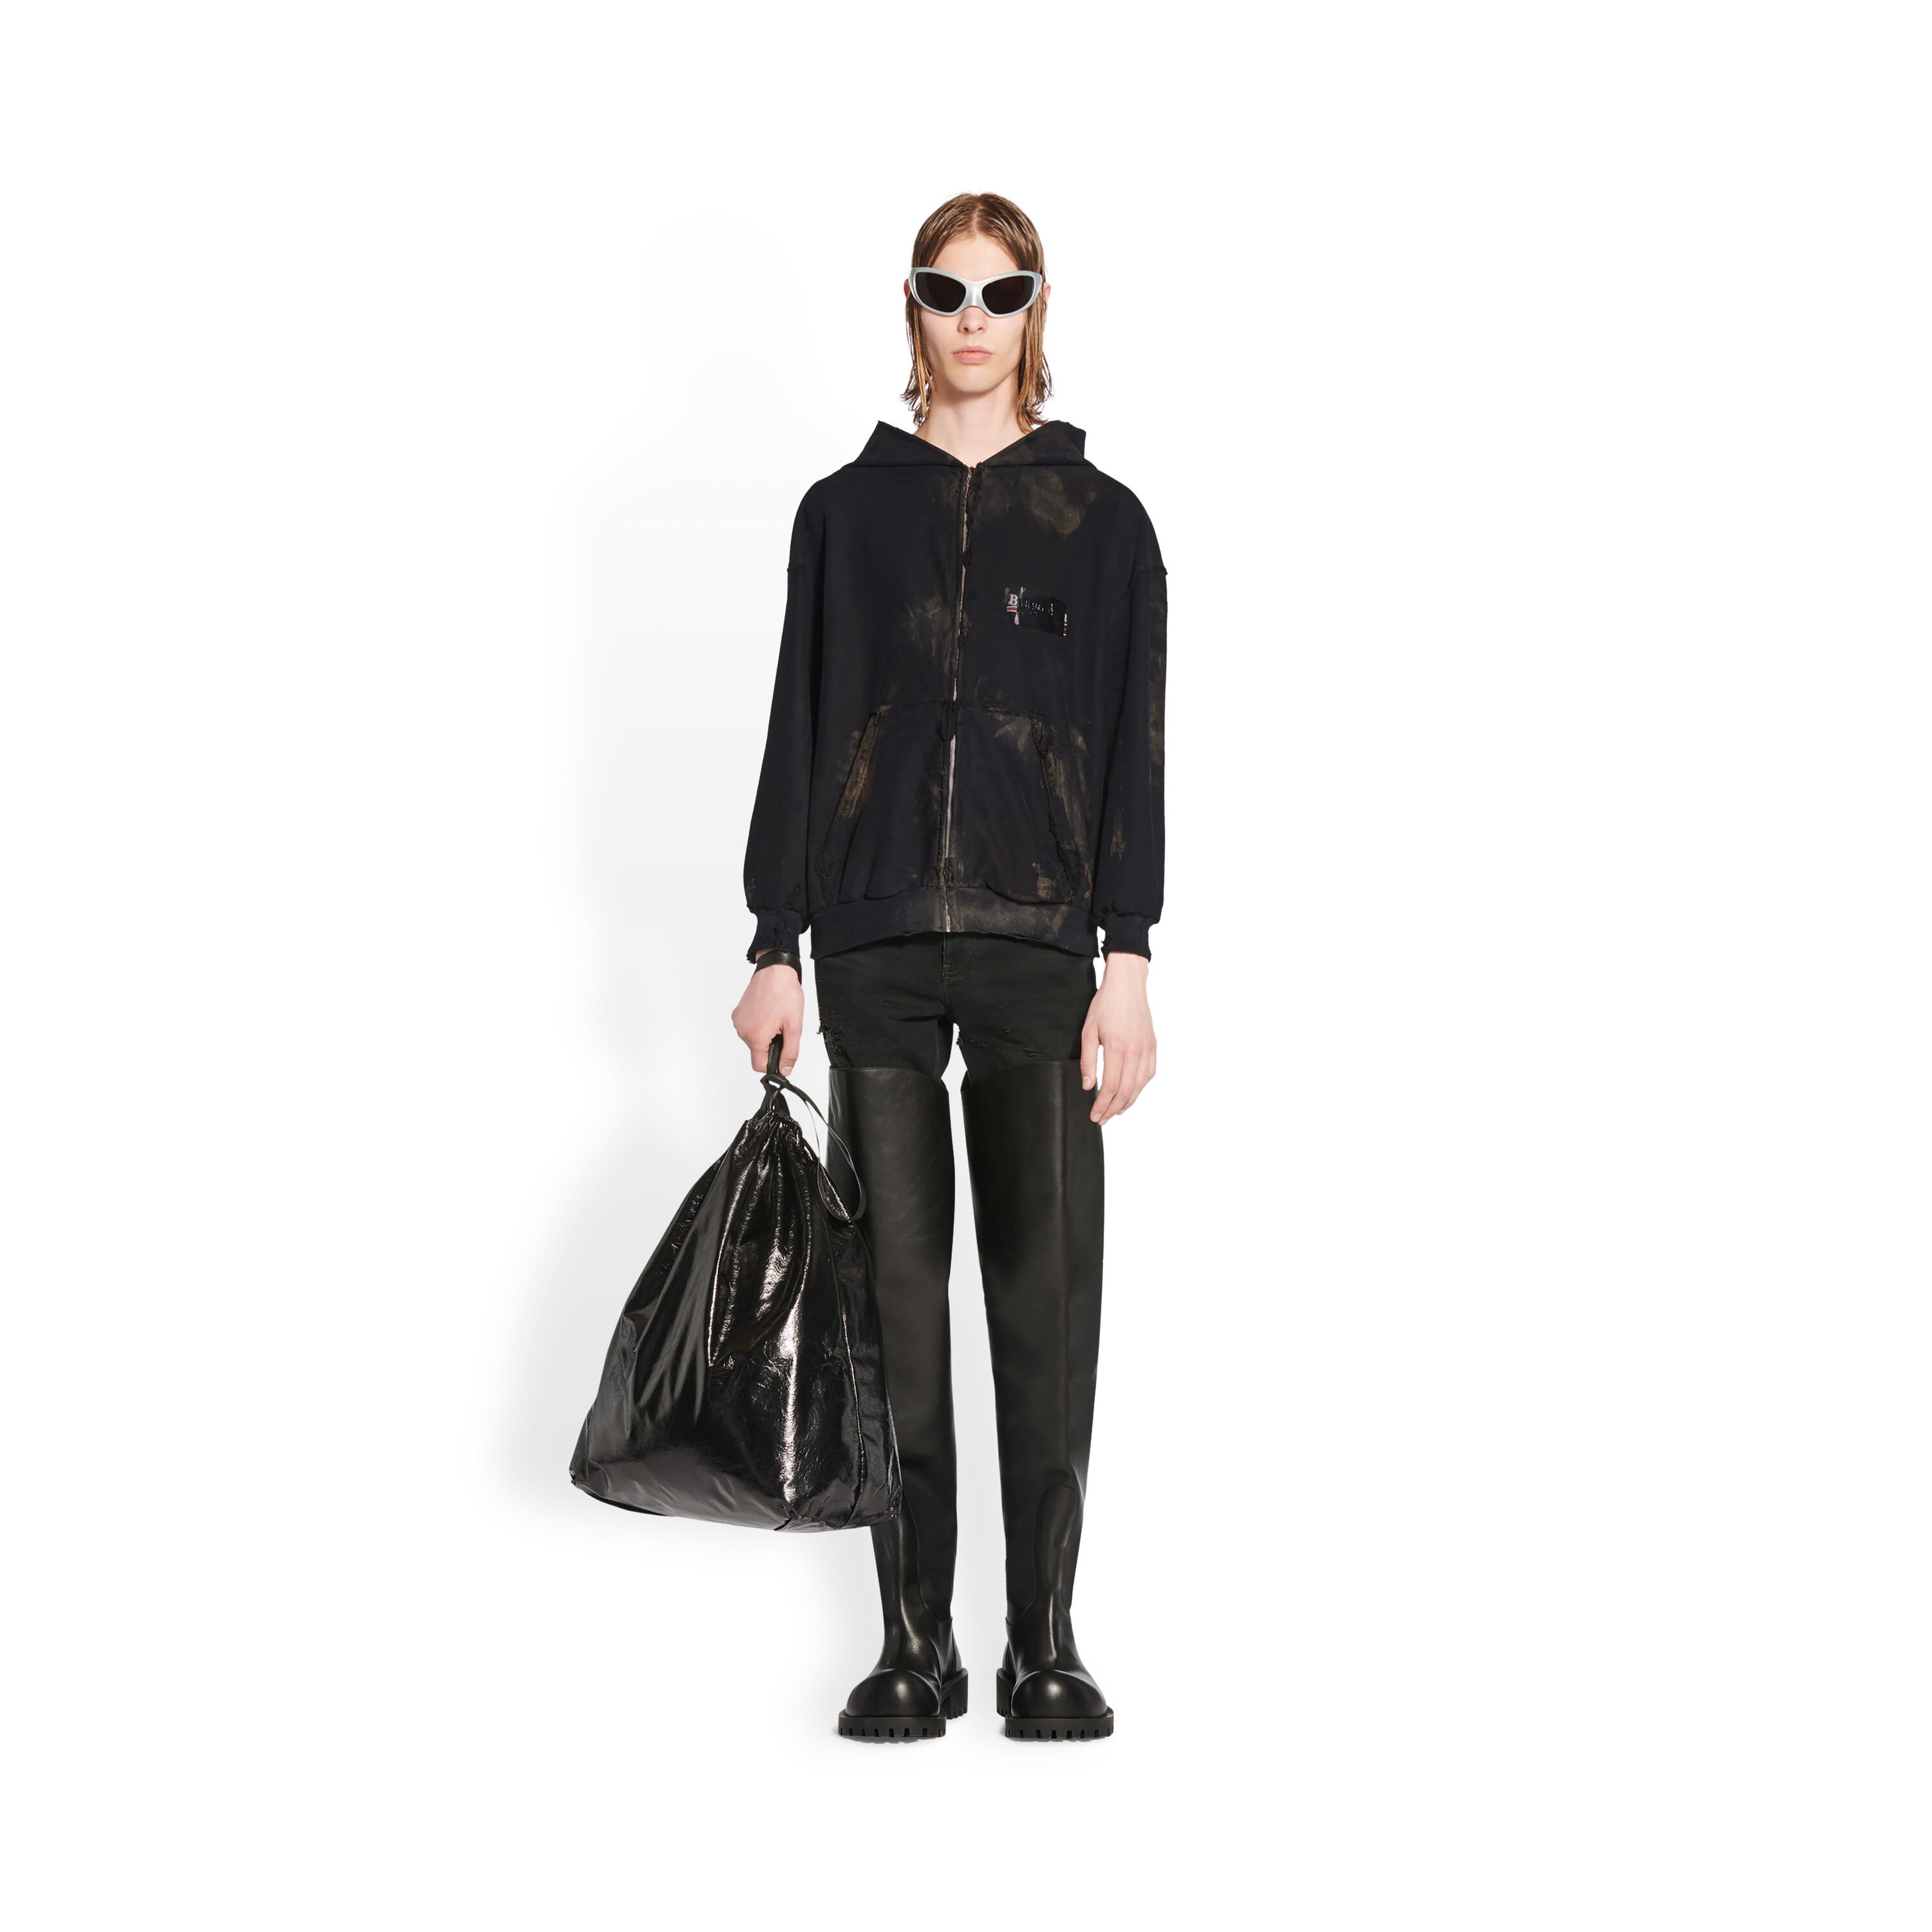 Gaffer Zip-up Hoodie Small Fit in Black | Balenciaga US